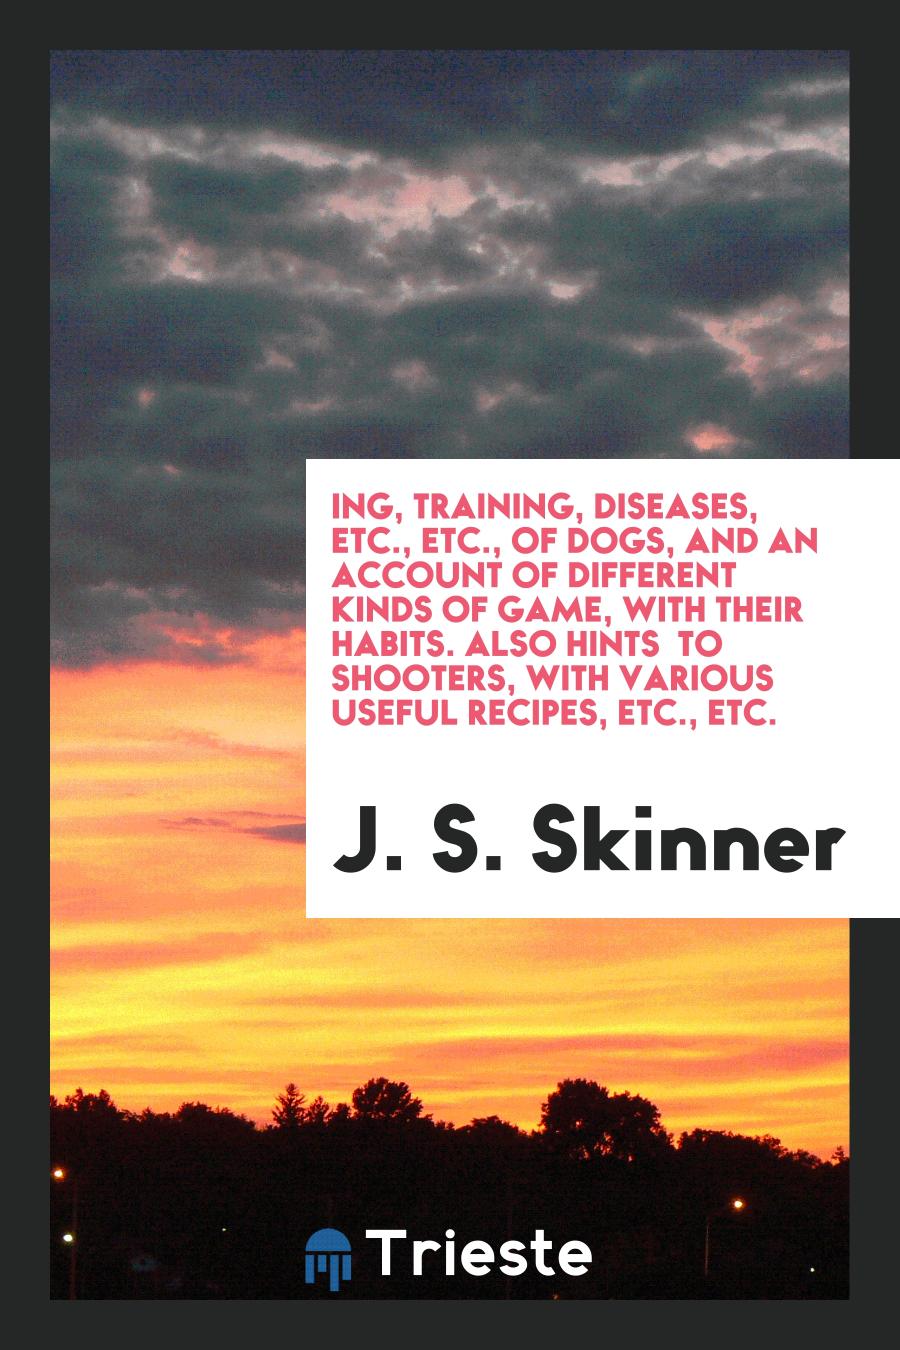 ing, Training, Diseases, Etc., Etc., of Dogs, and an Account of Different Kinds of Game, with Their Habits. Also Hints to Shooters, with Various Useful Recipes, Etc., Etc.